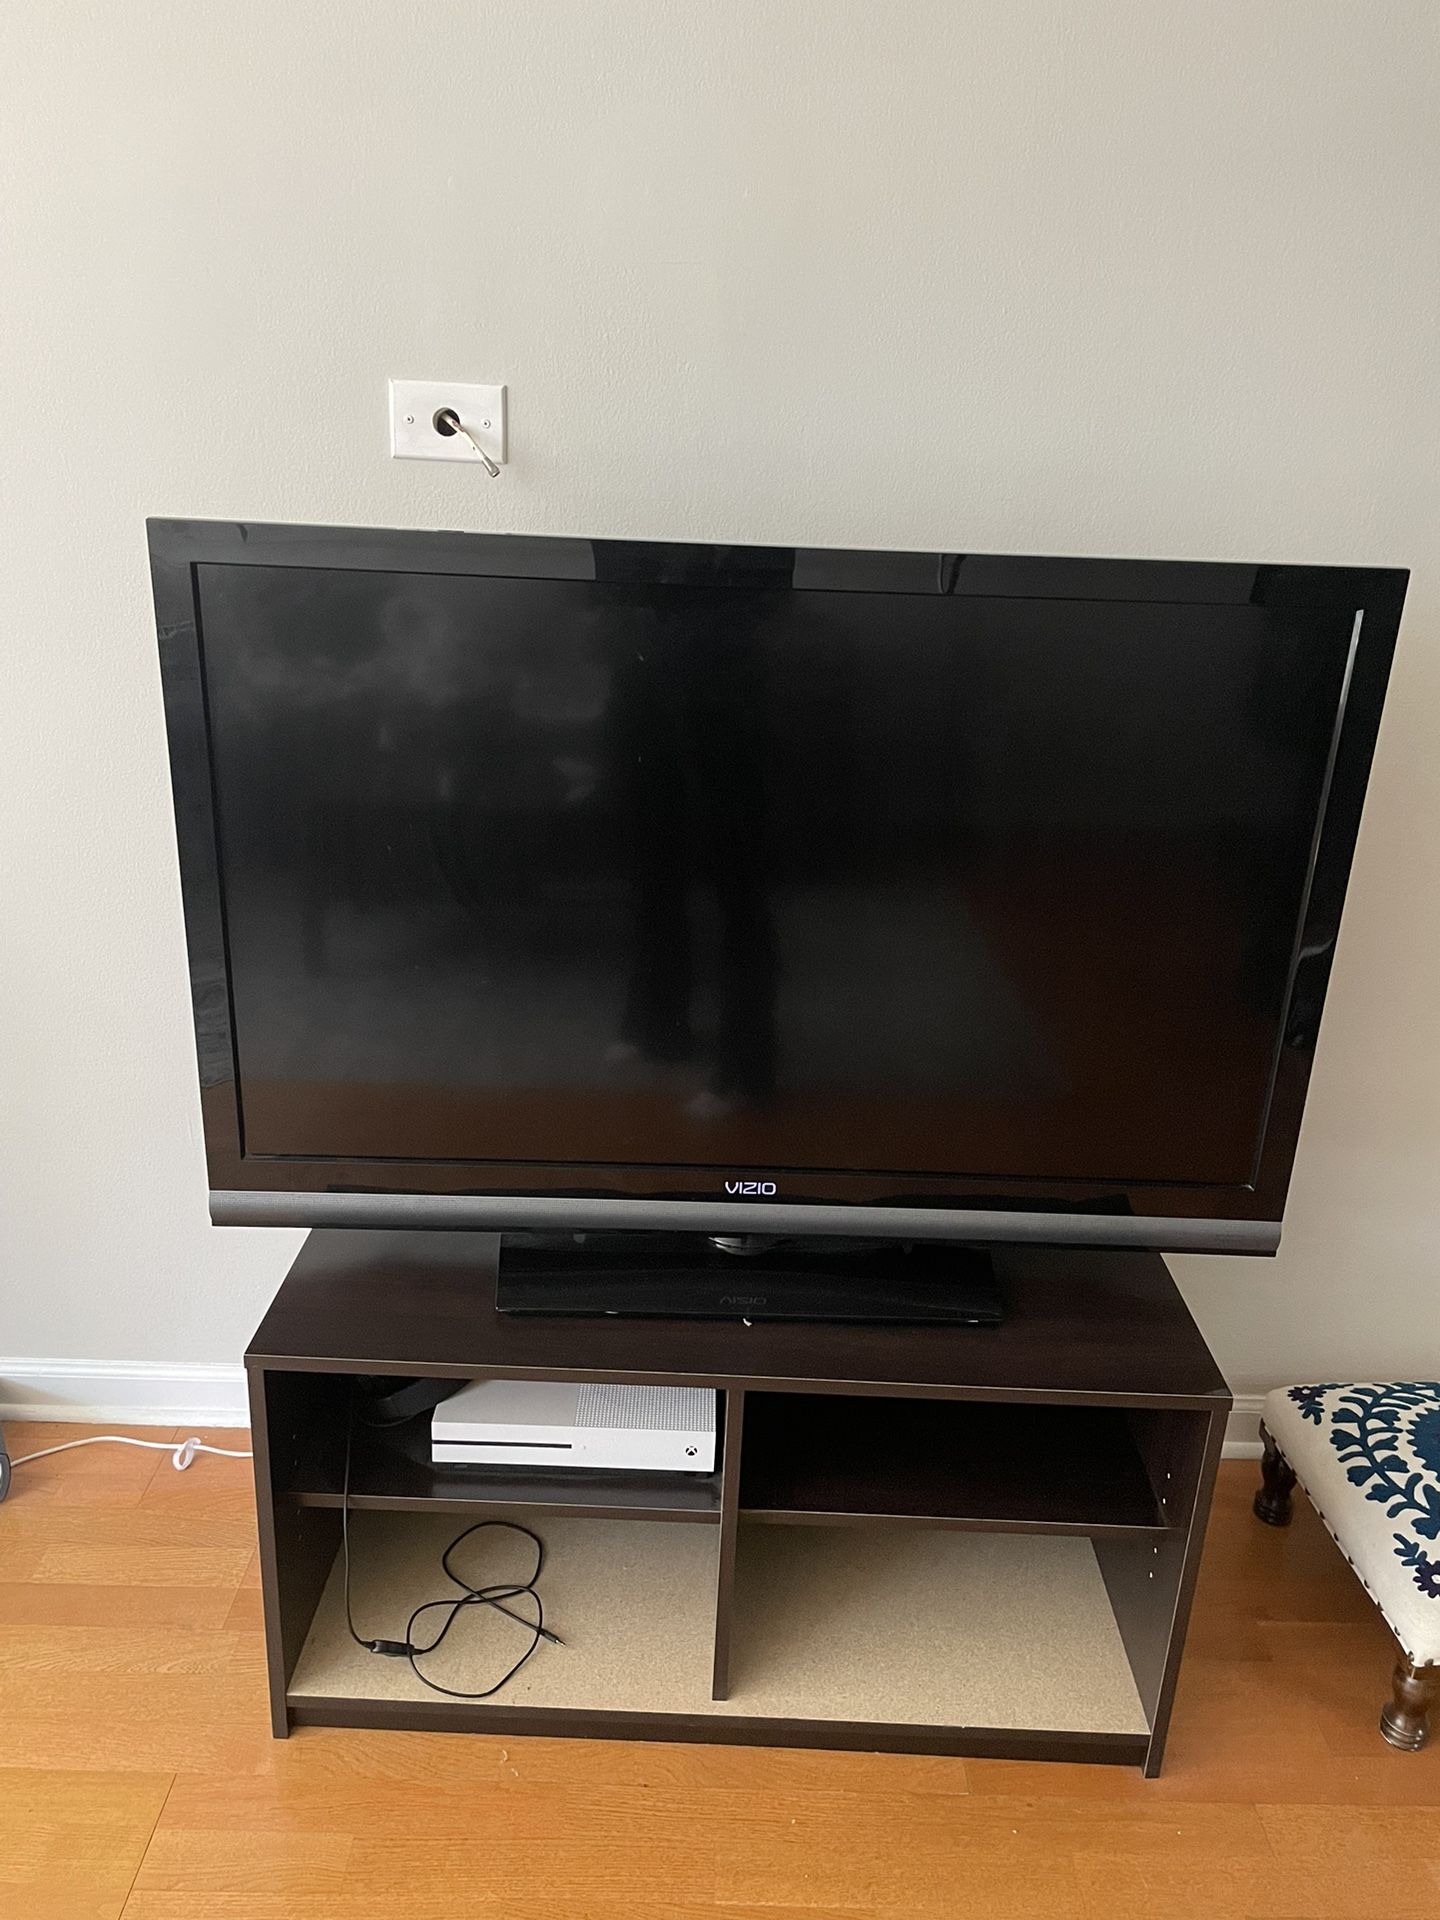 42-inch Vizio With TV Stand Included